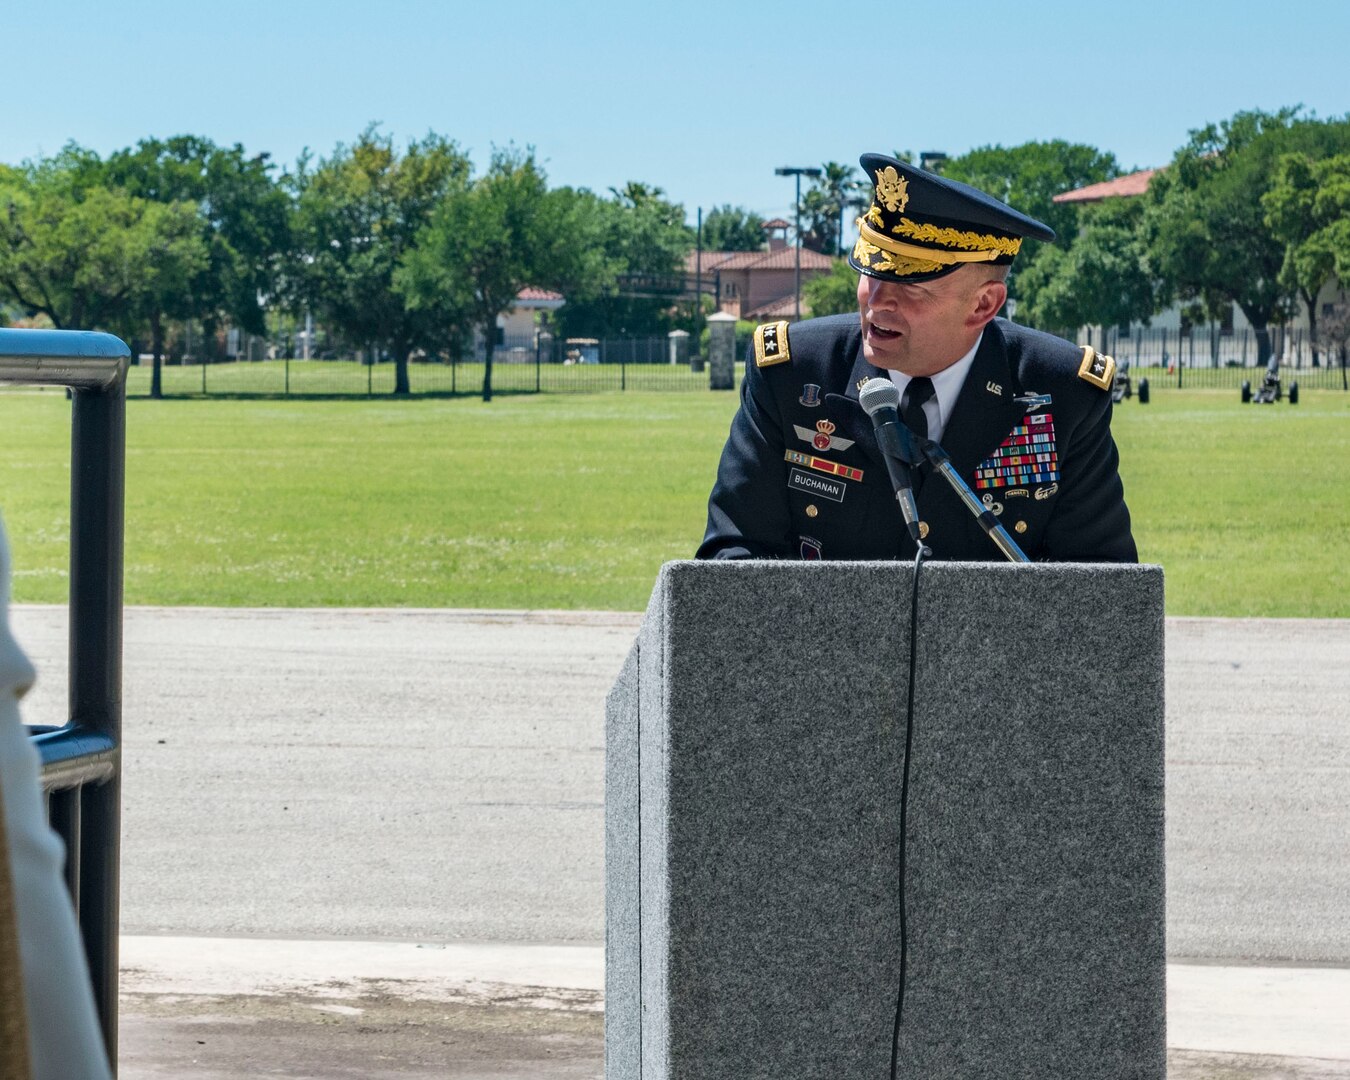 Lt. Gen. Jeffrey S. Buchanan, U.S. Army North commander, speaks April 20, 2019, at Joint Base San Antonio-Fort Sam Houston, Texas during the Fiesta and Fireworks Extravaganza. Fiesta honors the long-standing partnership between the U.S. military and San Antonio in annual Fiesta events, which commemorate Texas’ independence after the Battle of San Jacinto and the Alamo.  (U.S. Air Force photo by Senior Airman Stormy Archer)